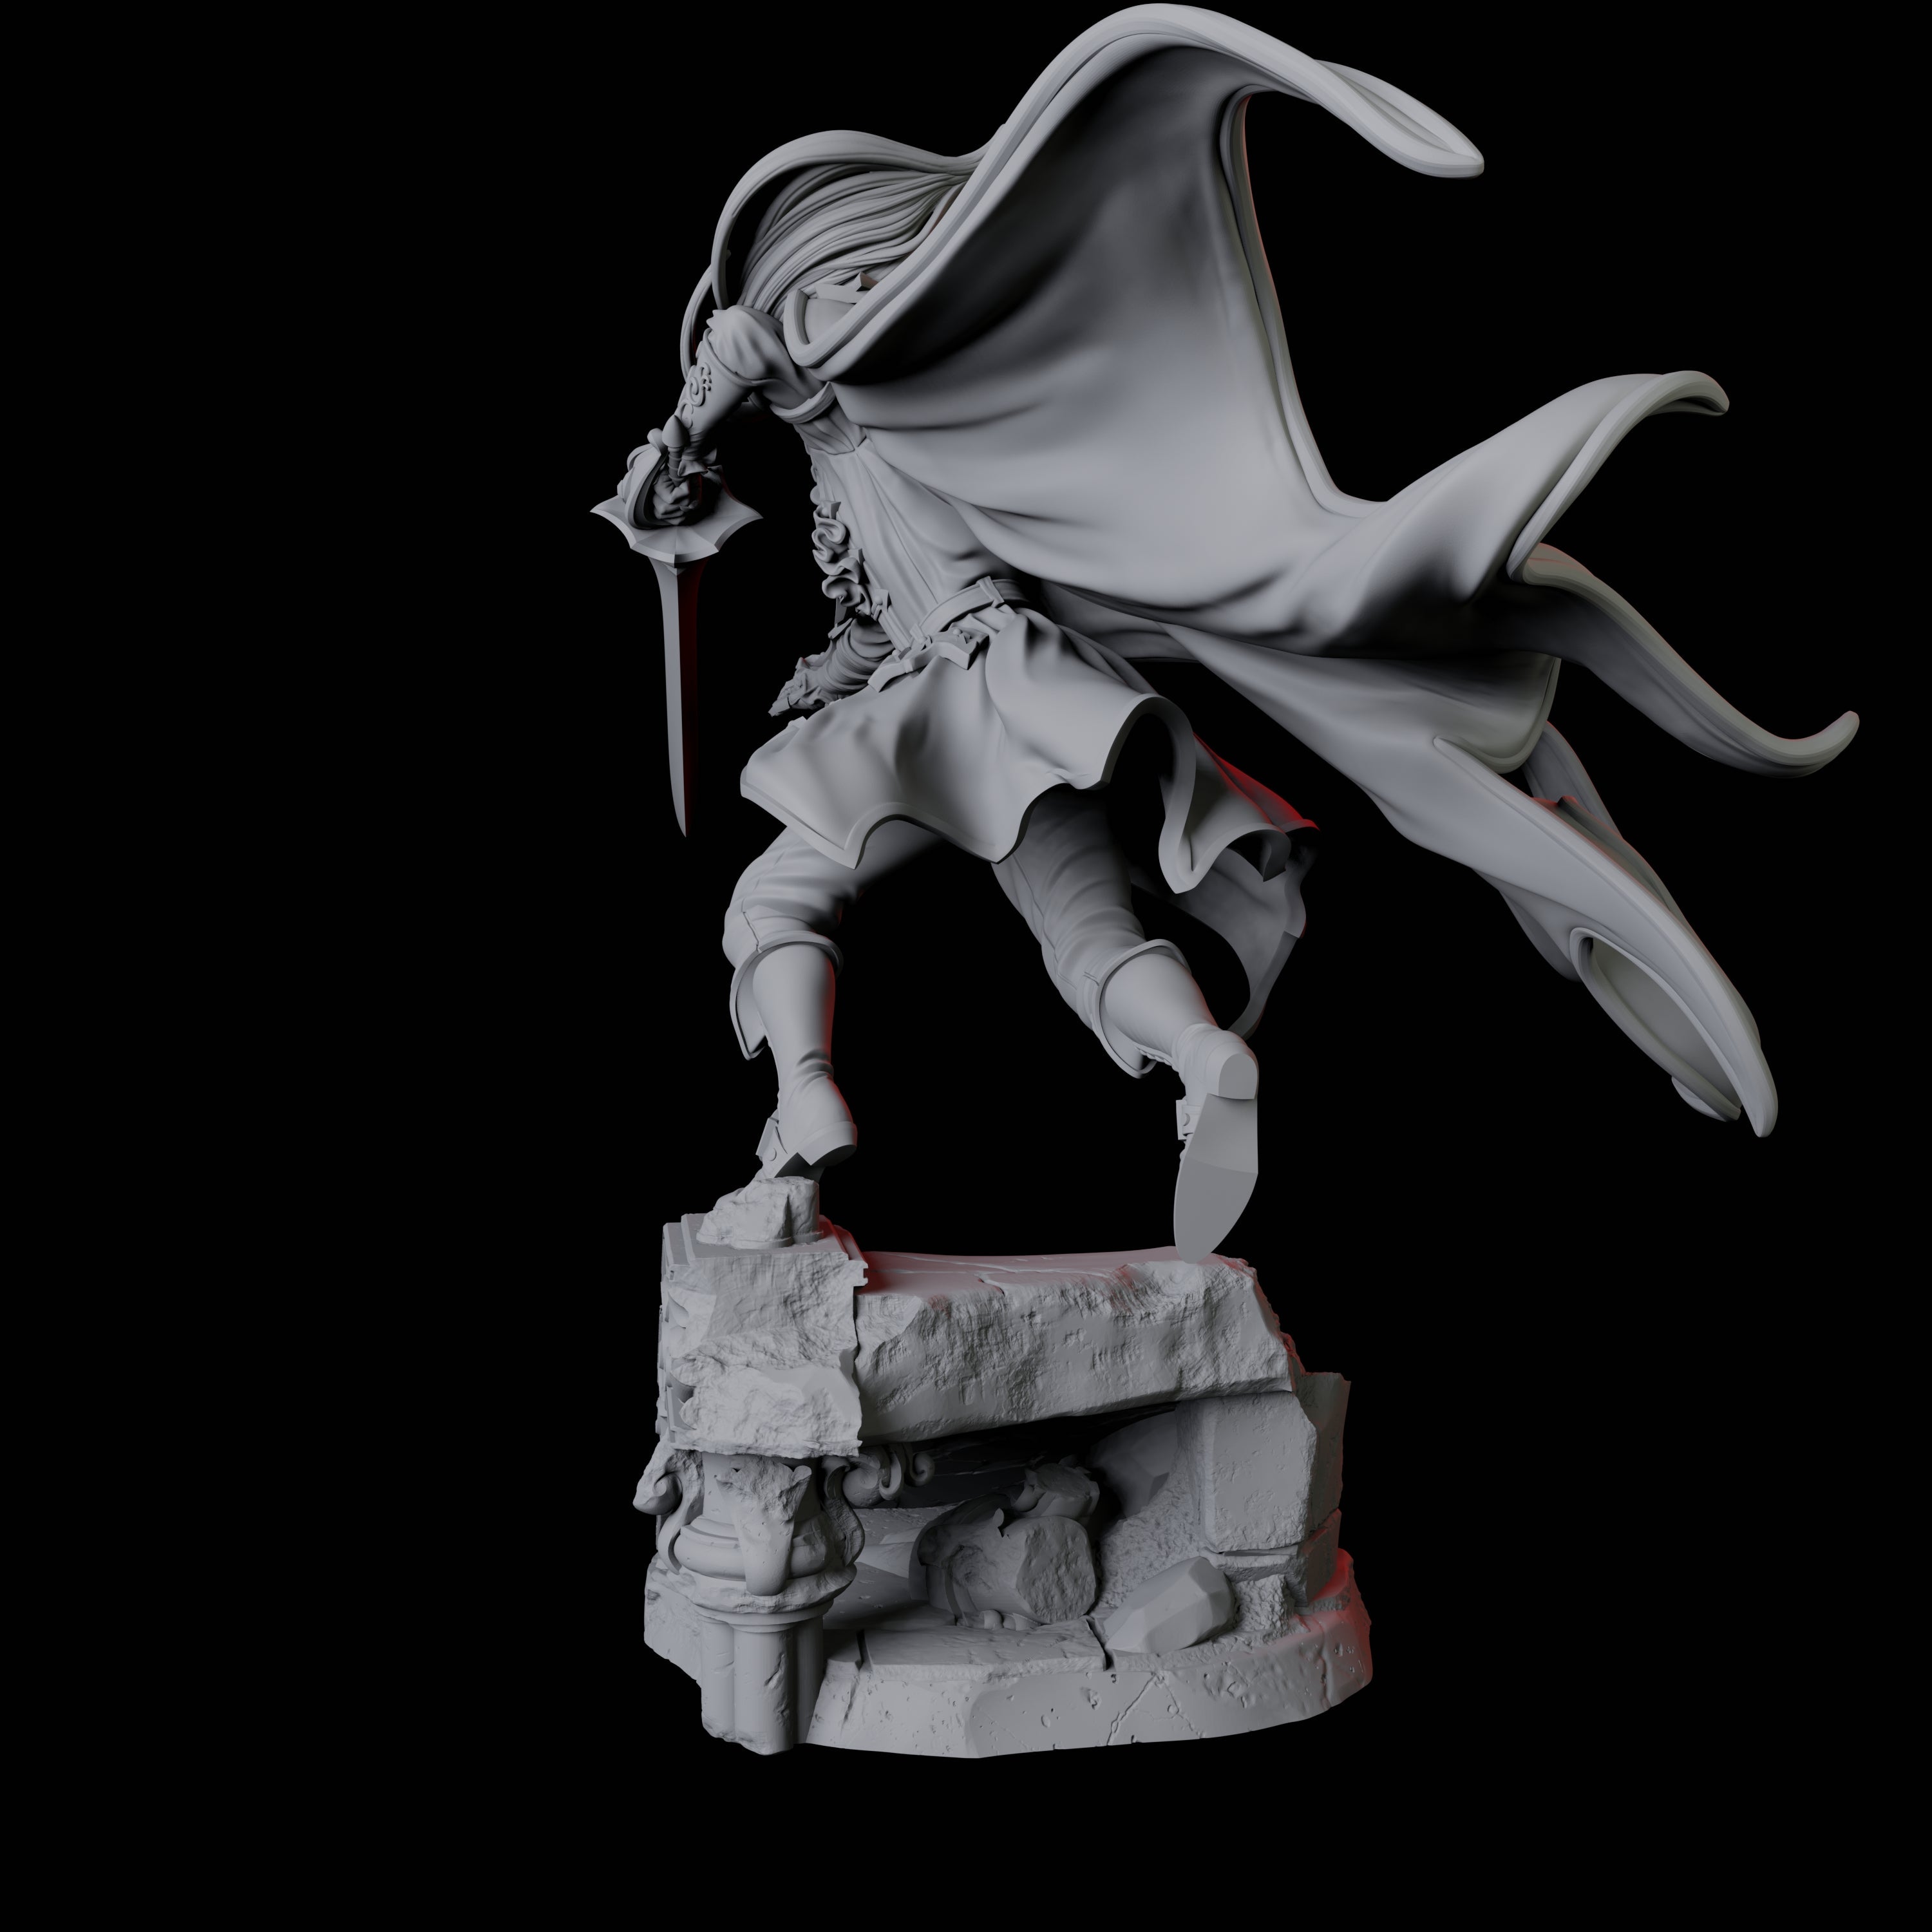 Leaping Swashbuckler Miniature for Dungeons and Dragons, Pathfinder or other TTRPGs